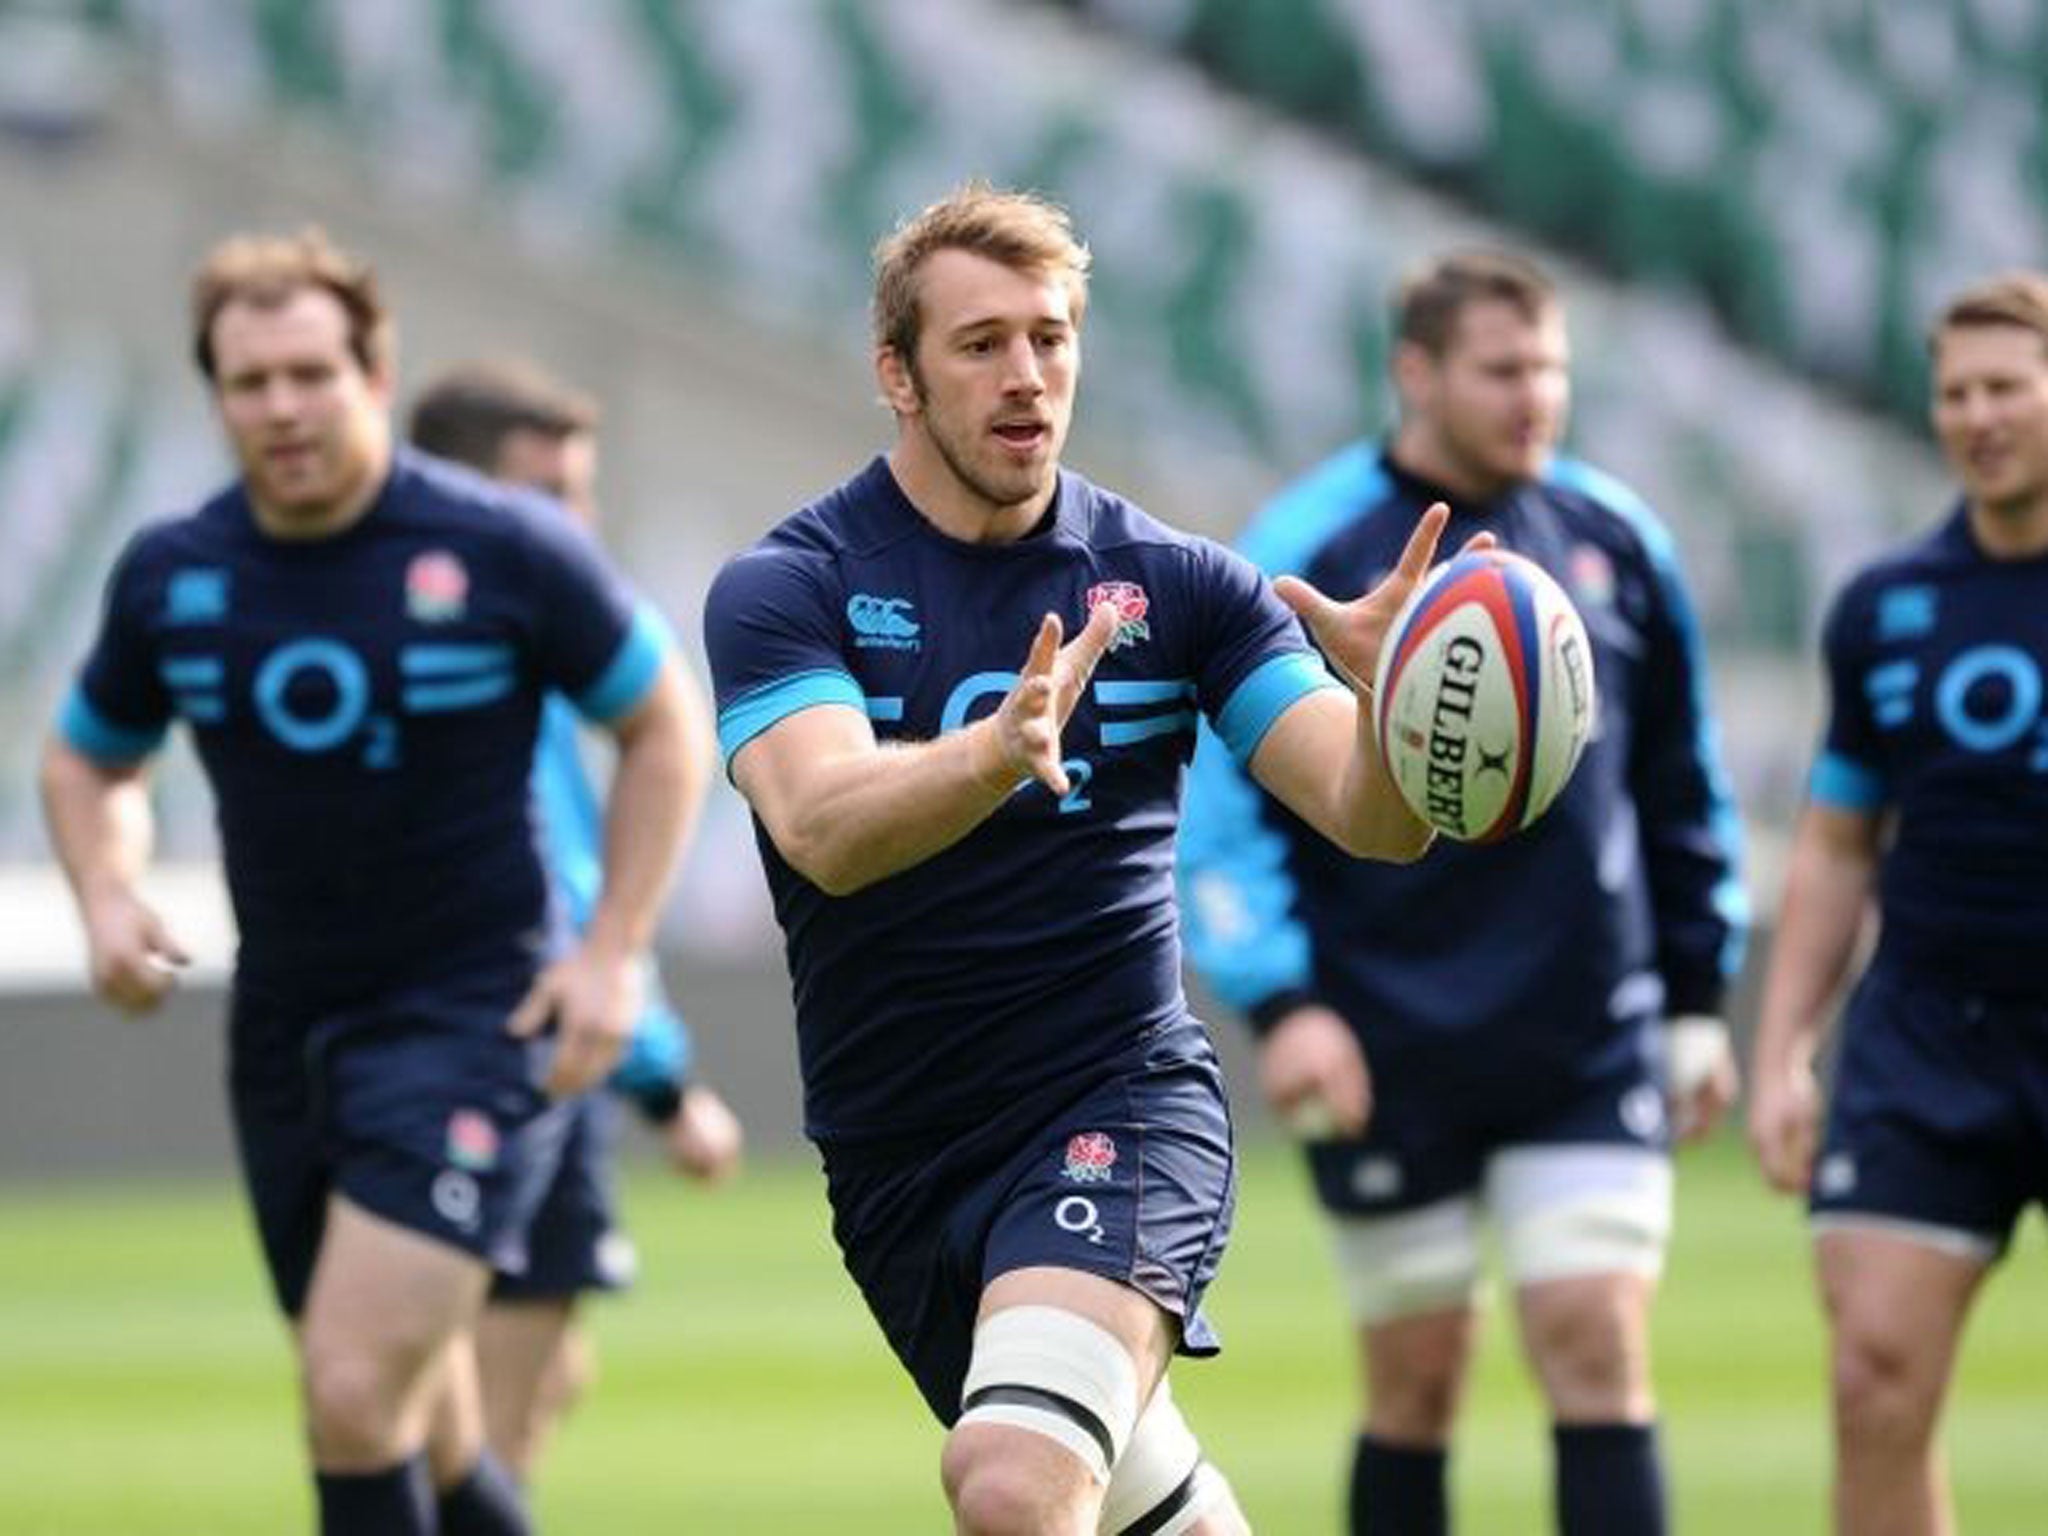 Leading light: England captain Chris Robshaw takes centre stage in training – and aims to do the same in the match